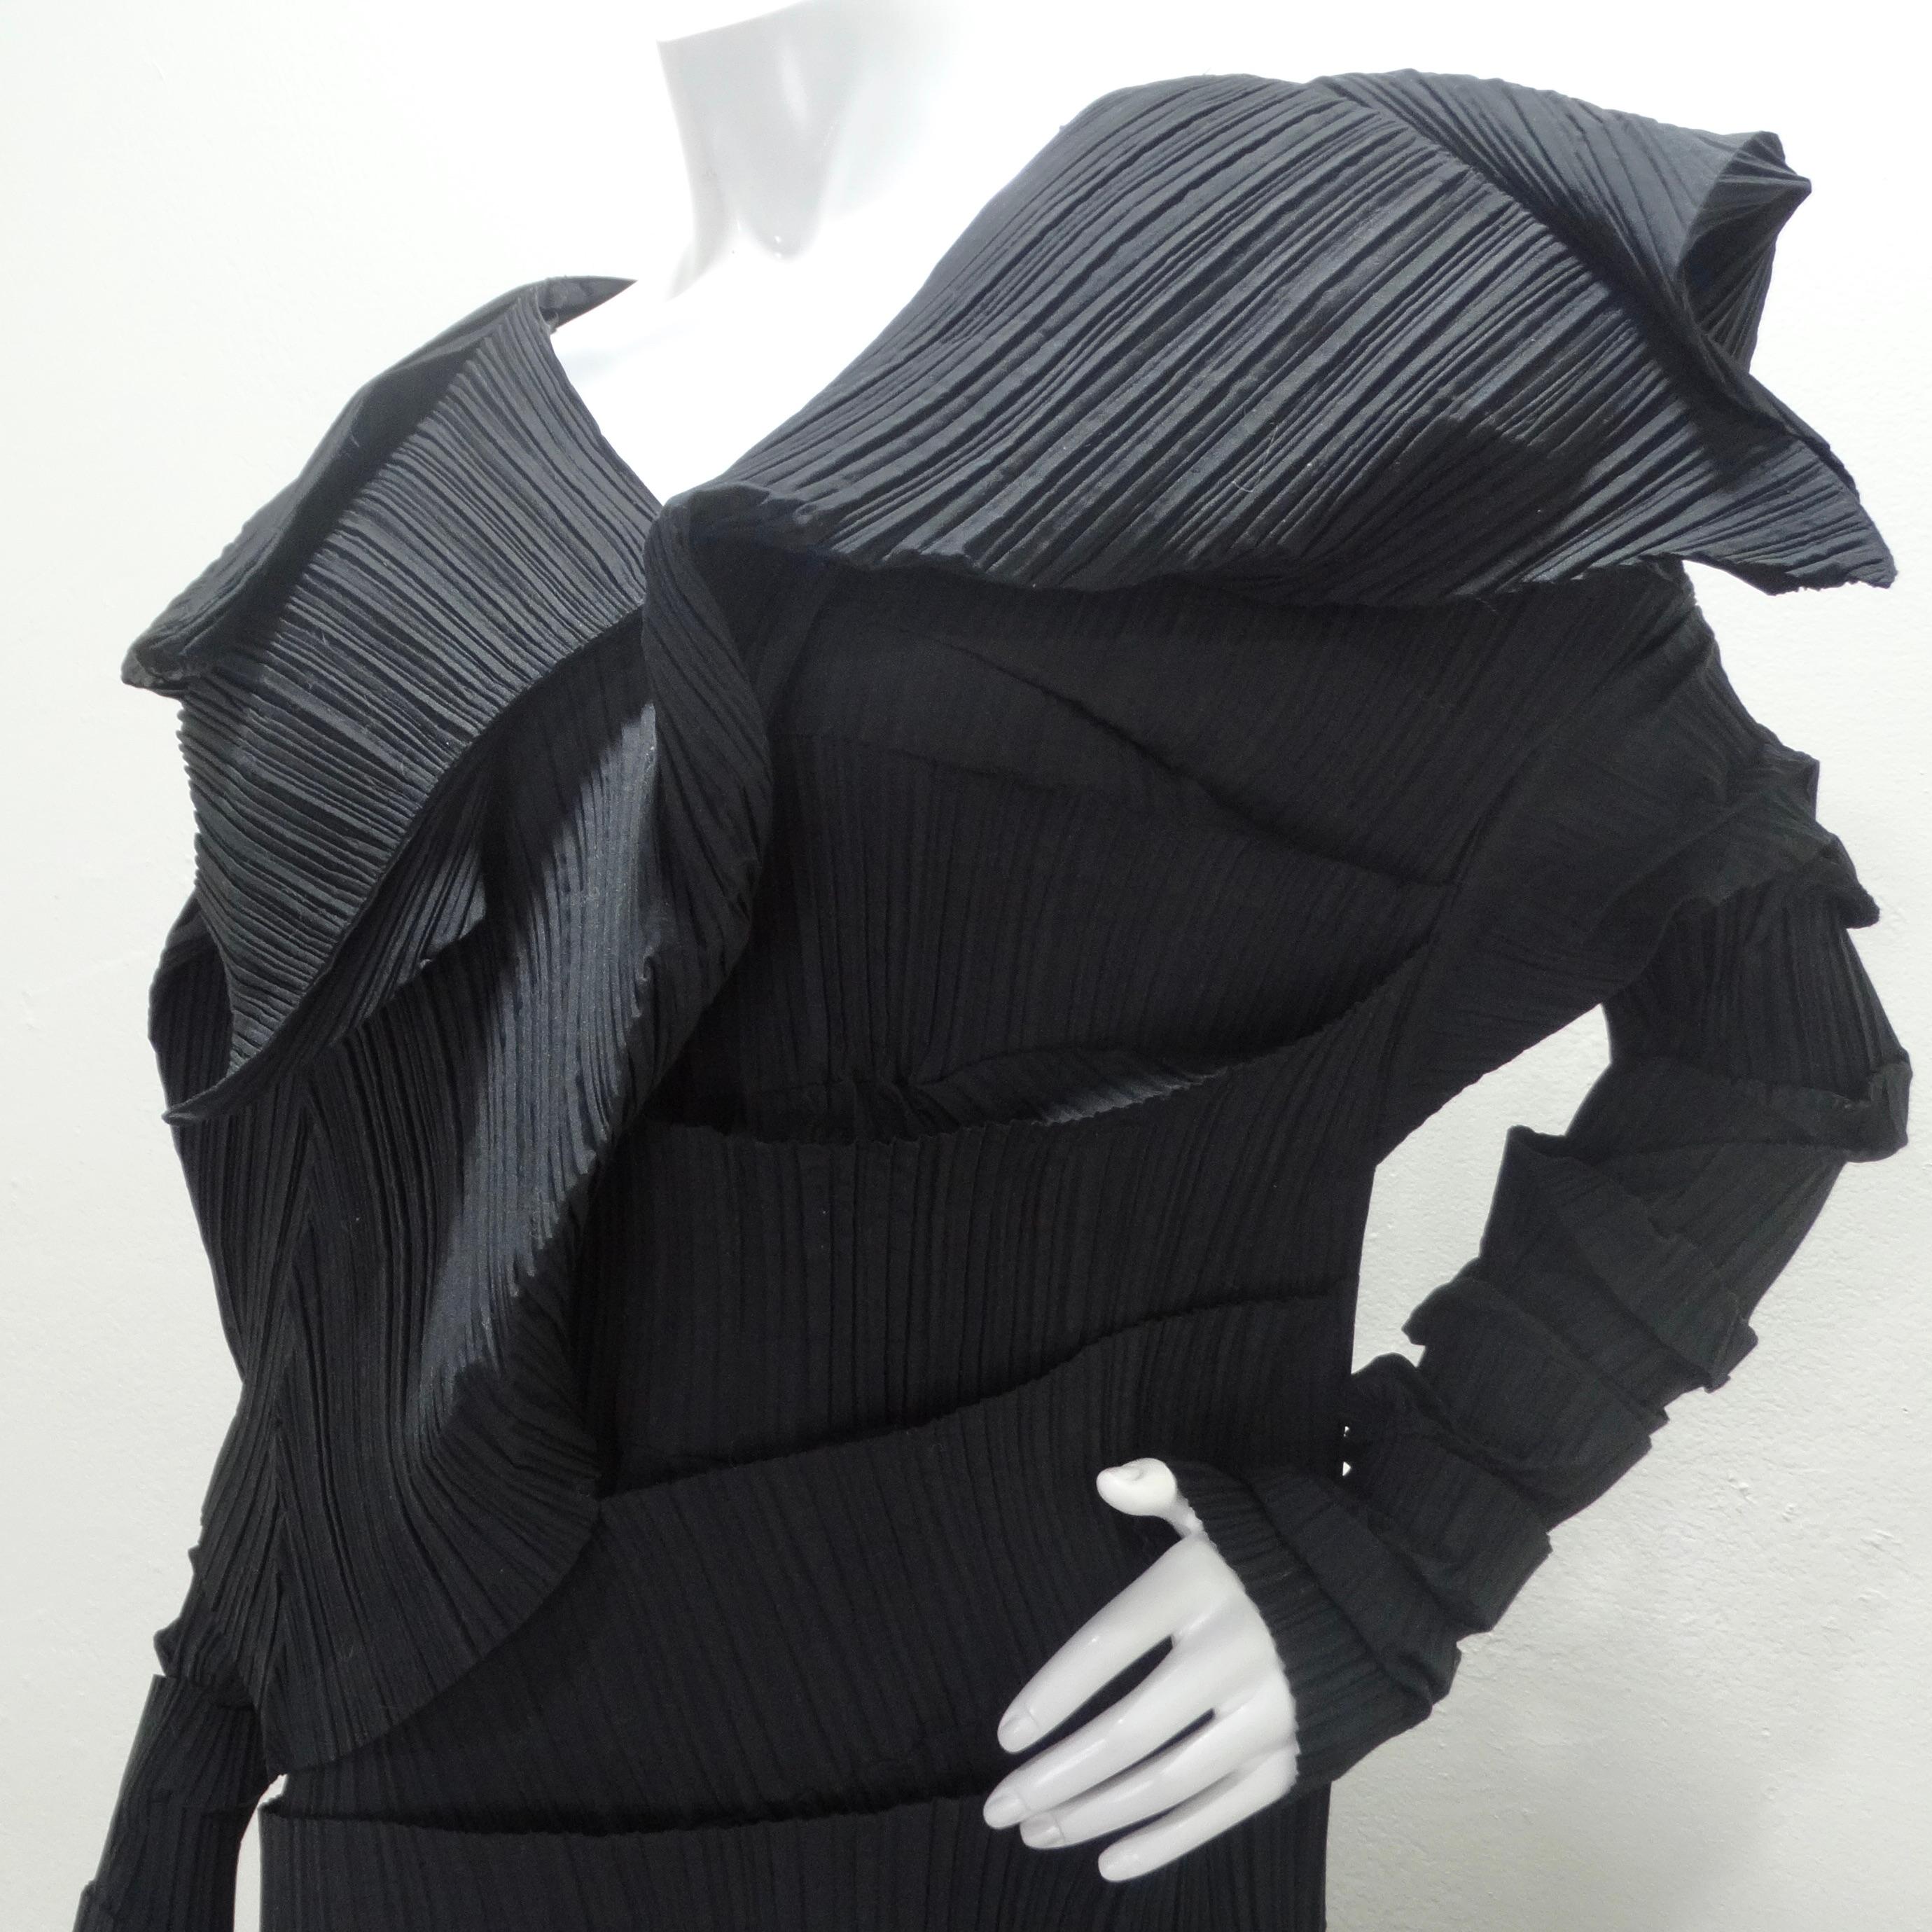 Issey Miyake 1989 Reverse Pleats Black Sculptural Museum Quality Dress In Excellent Condition For Sale In Scottsdale, AZ